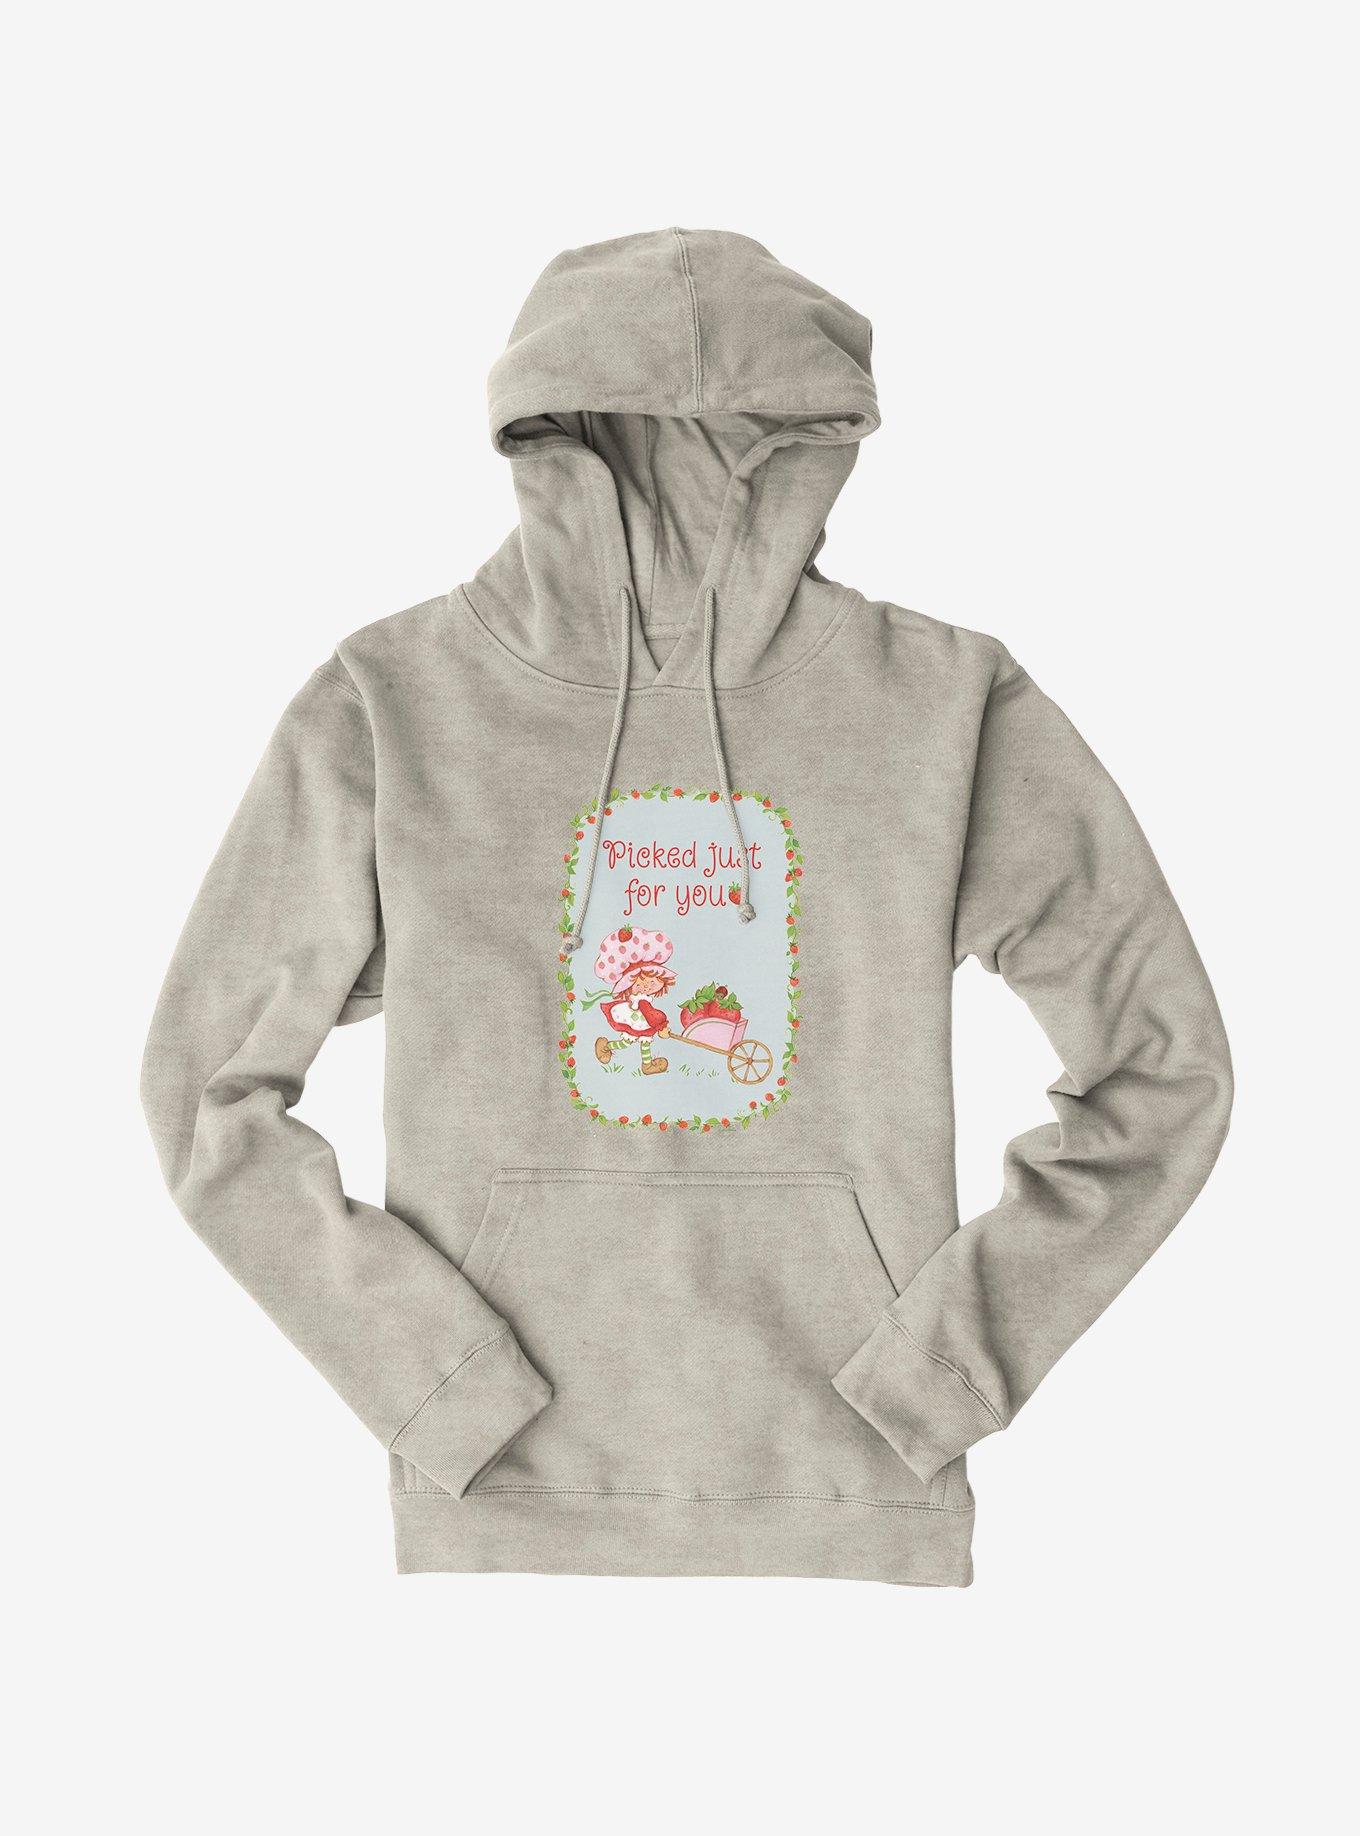 Strawberry Shortcake Picked Just For You Hoodie, OATMEAL HEATHER, hi-res